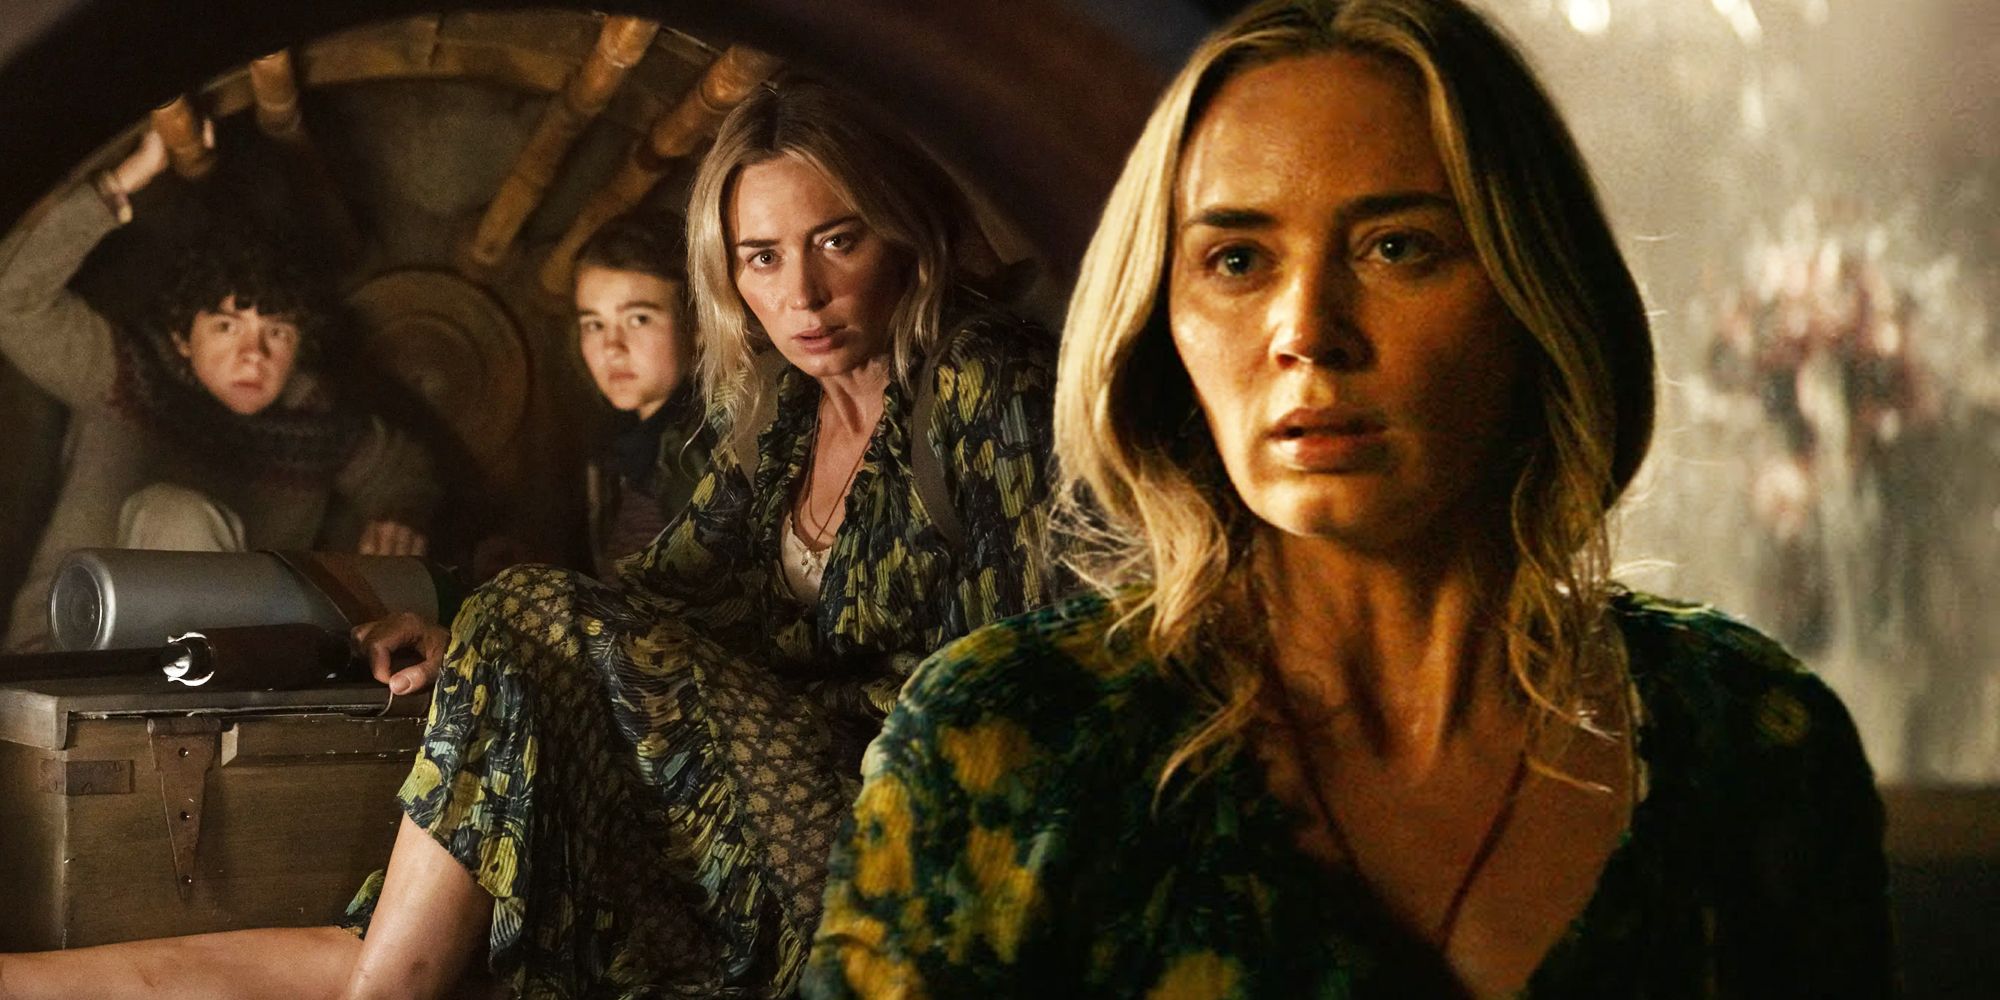 A Quiet Place: Day One Reveal Sets Up John Krasinski's Return (But With 2 Problems)